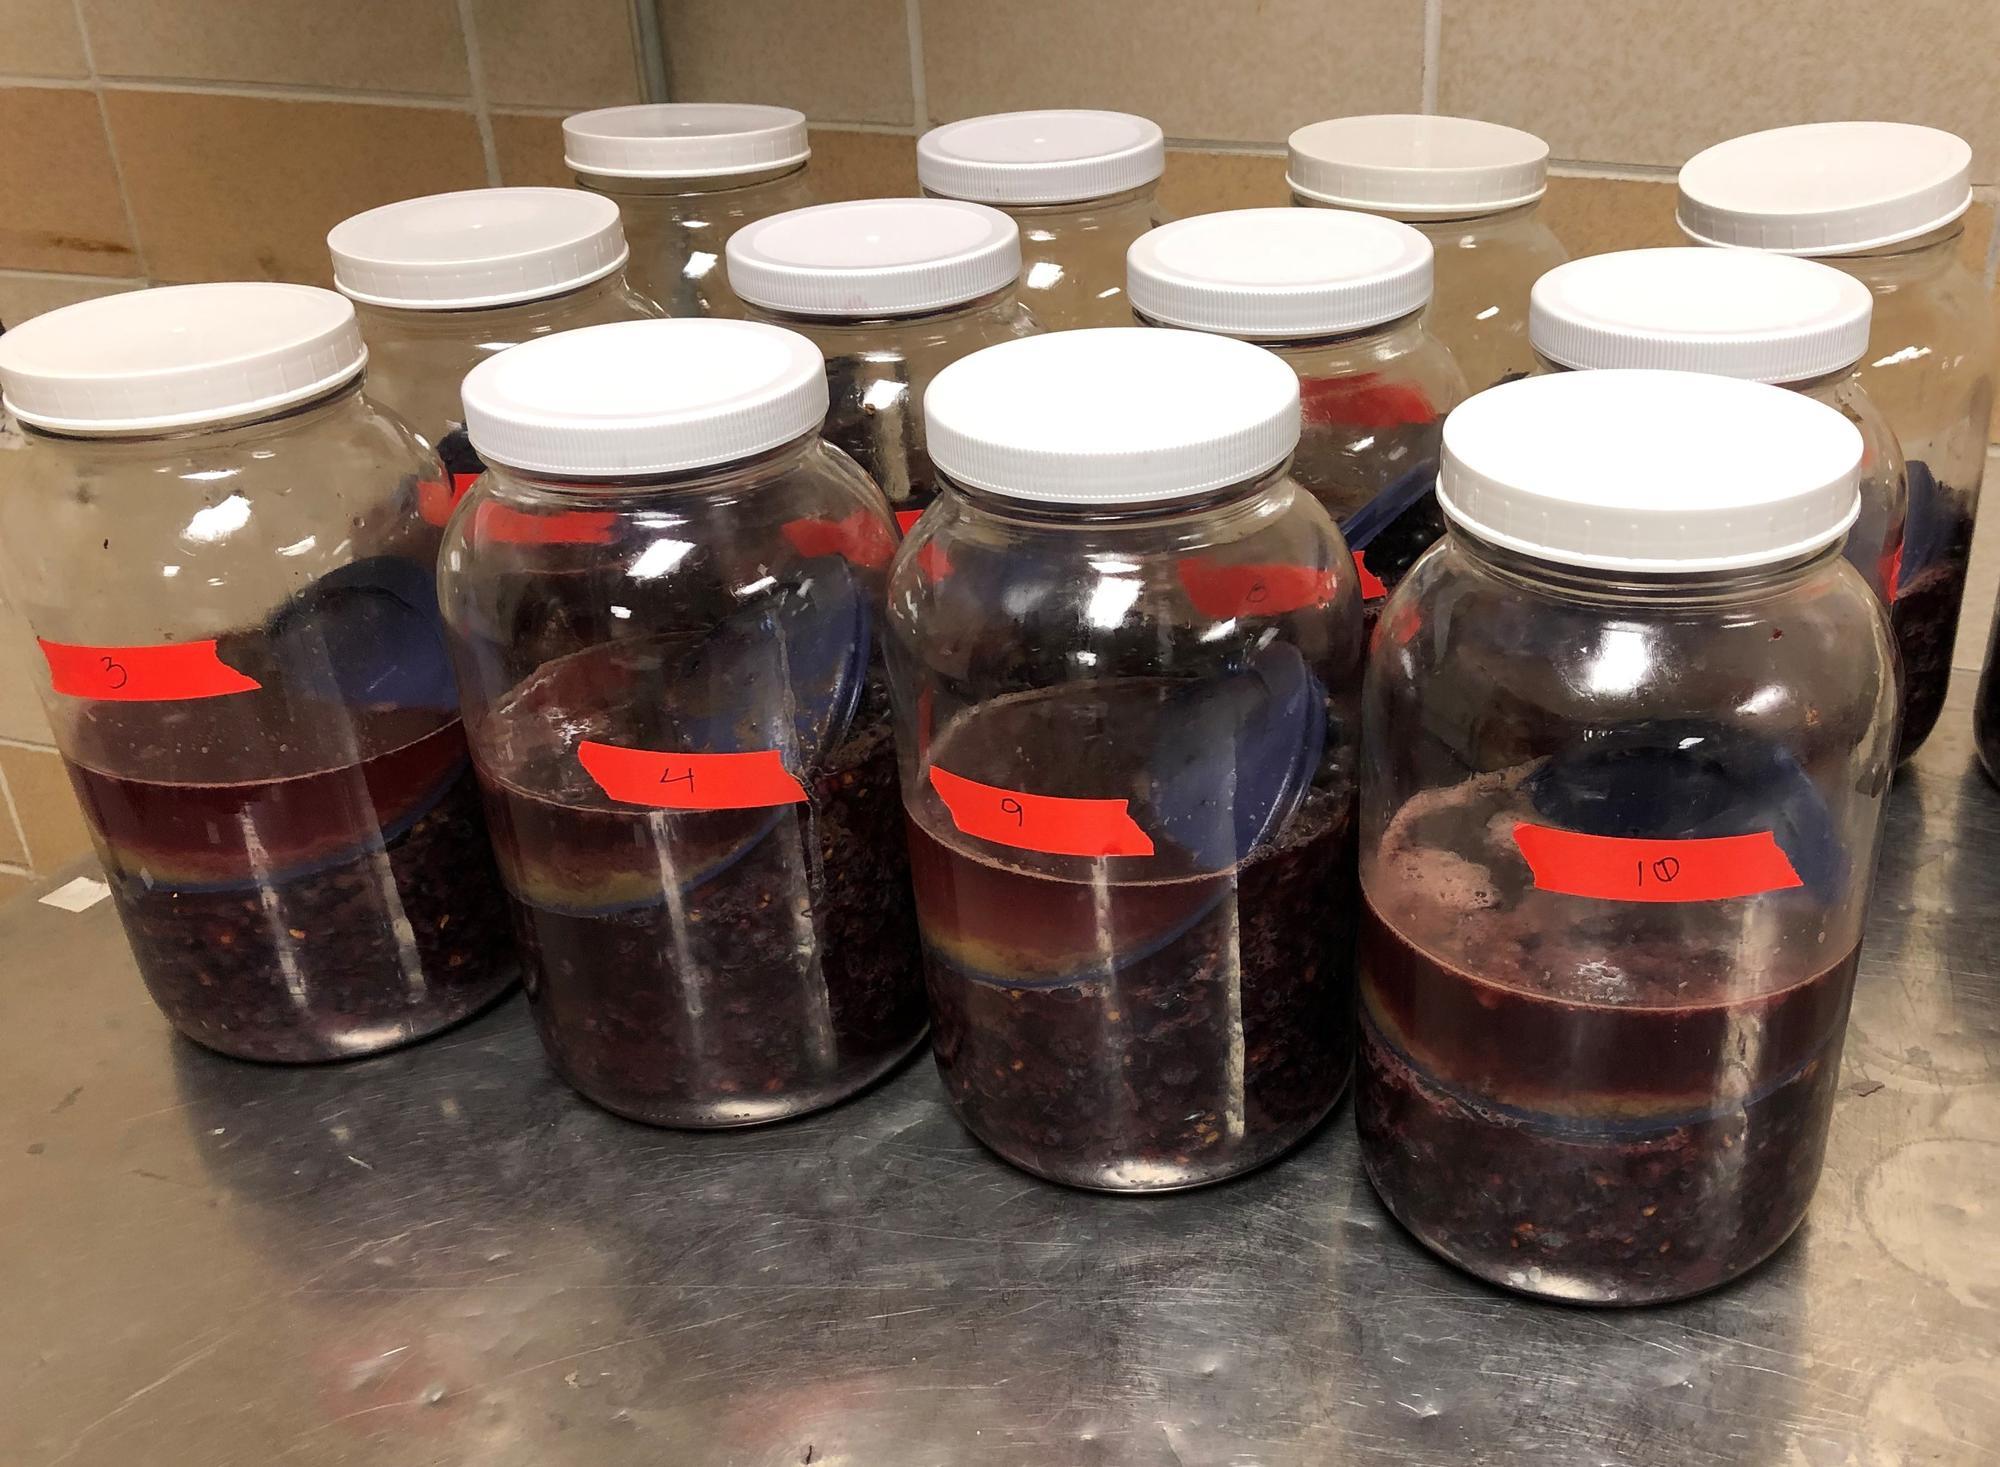 Jars containing micro fermentations of grapes prepared for testing for smoke volatile phenols